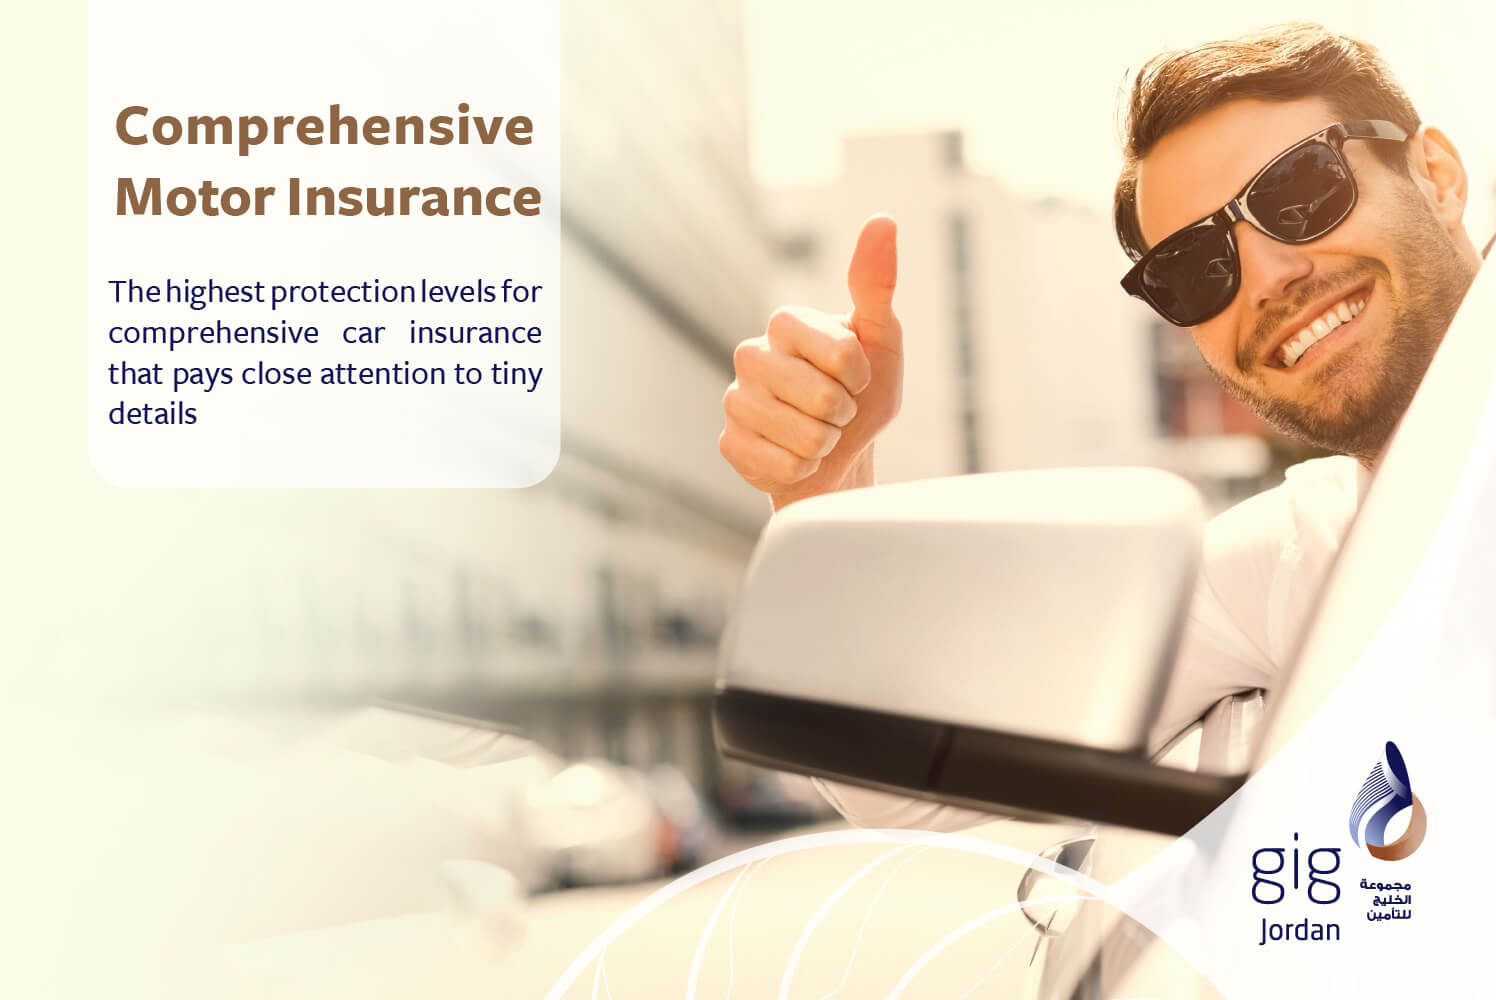  Motor Insurance Comprehensive/Complementary